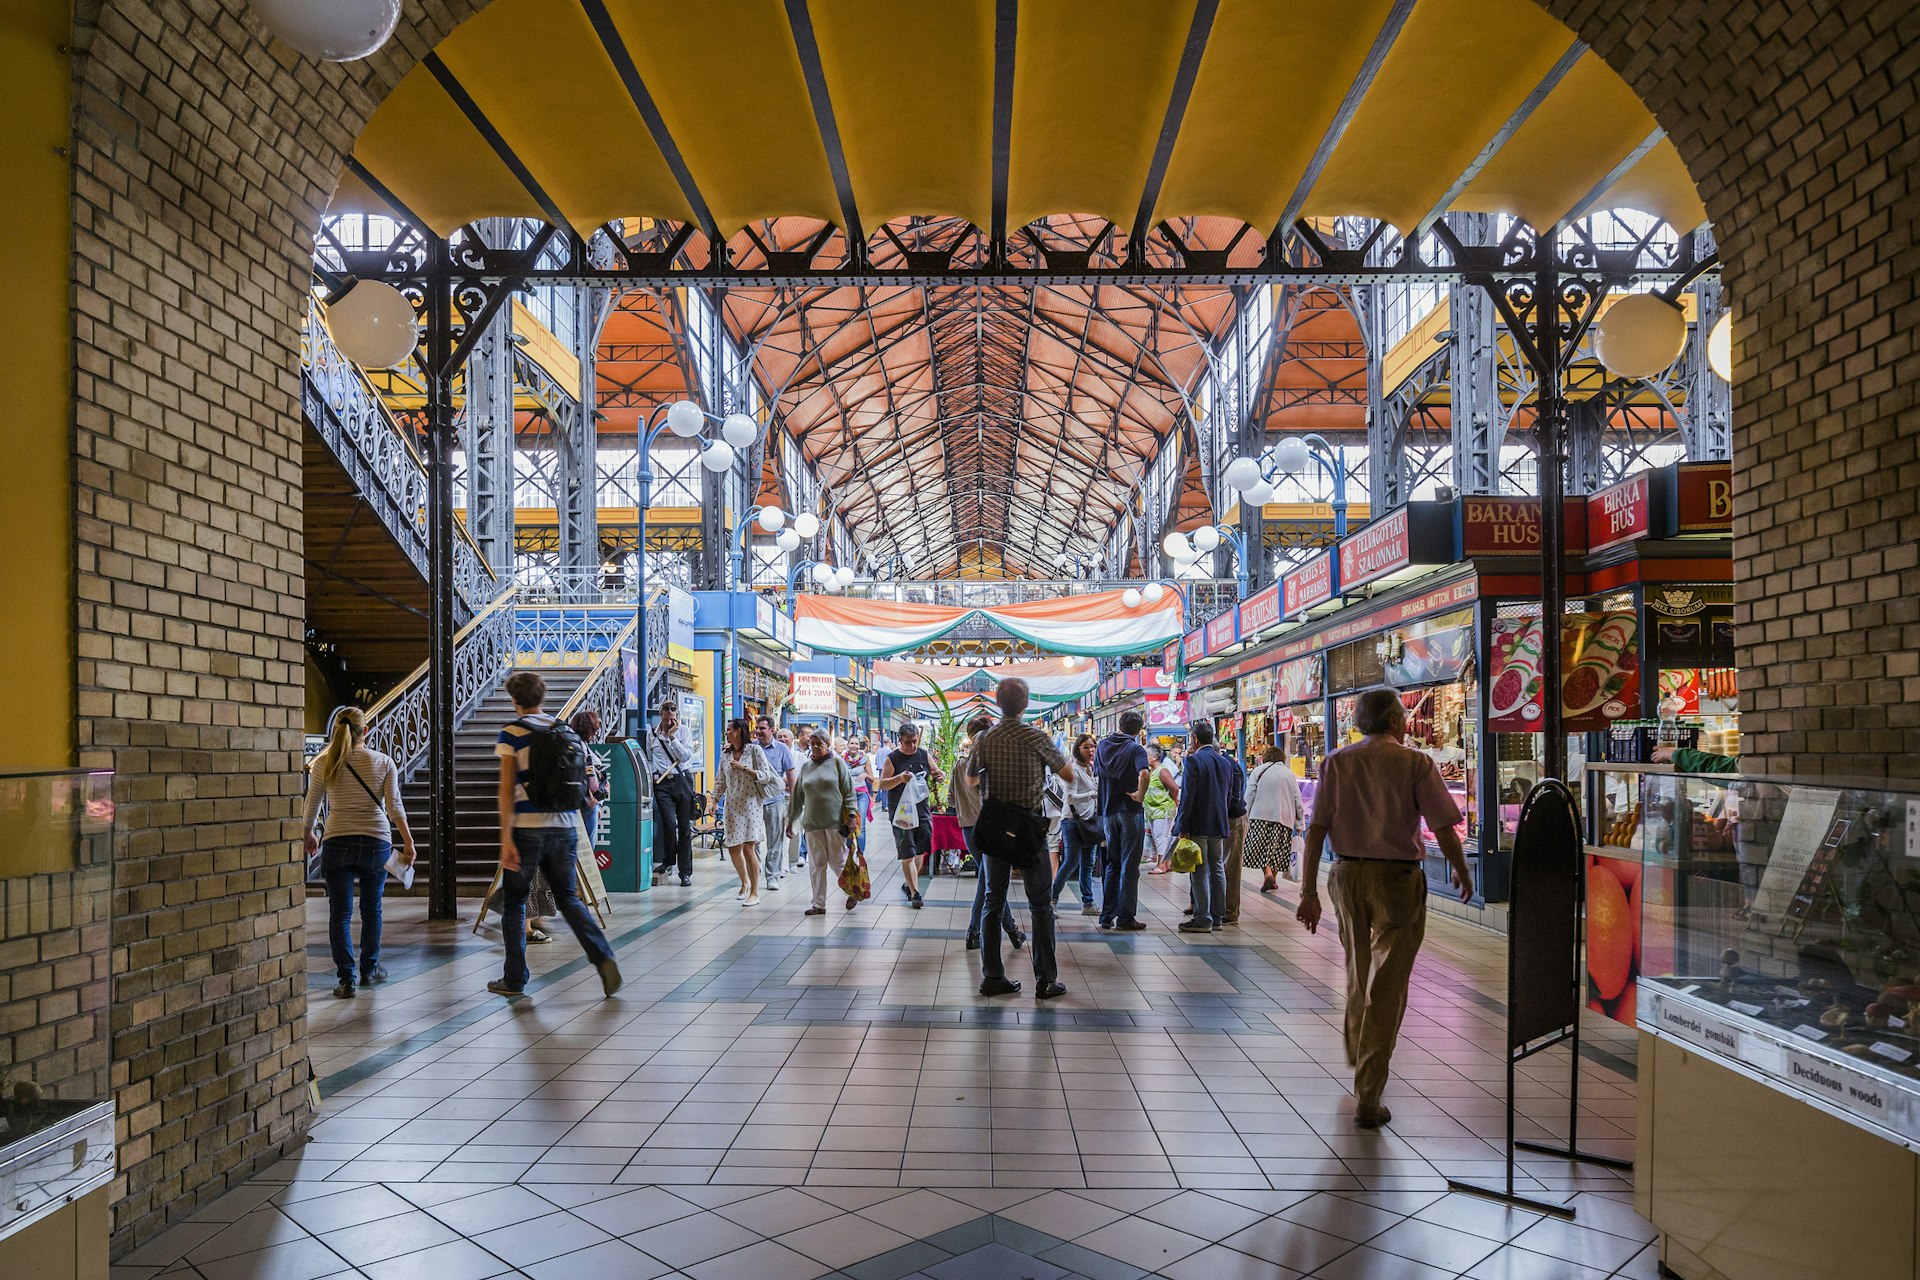 A busy indoor market place with lots of people walking through